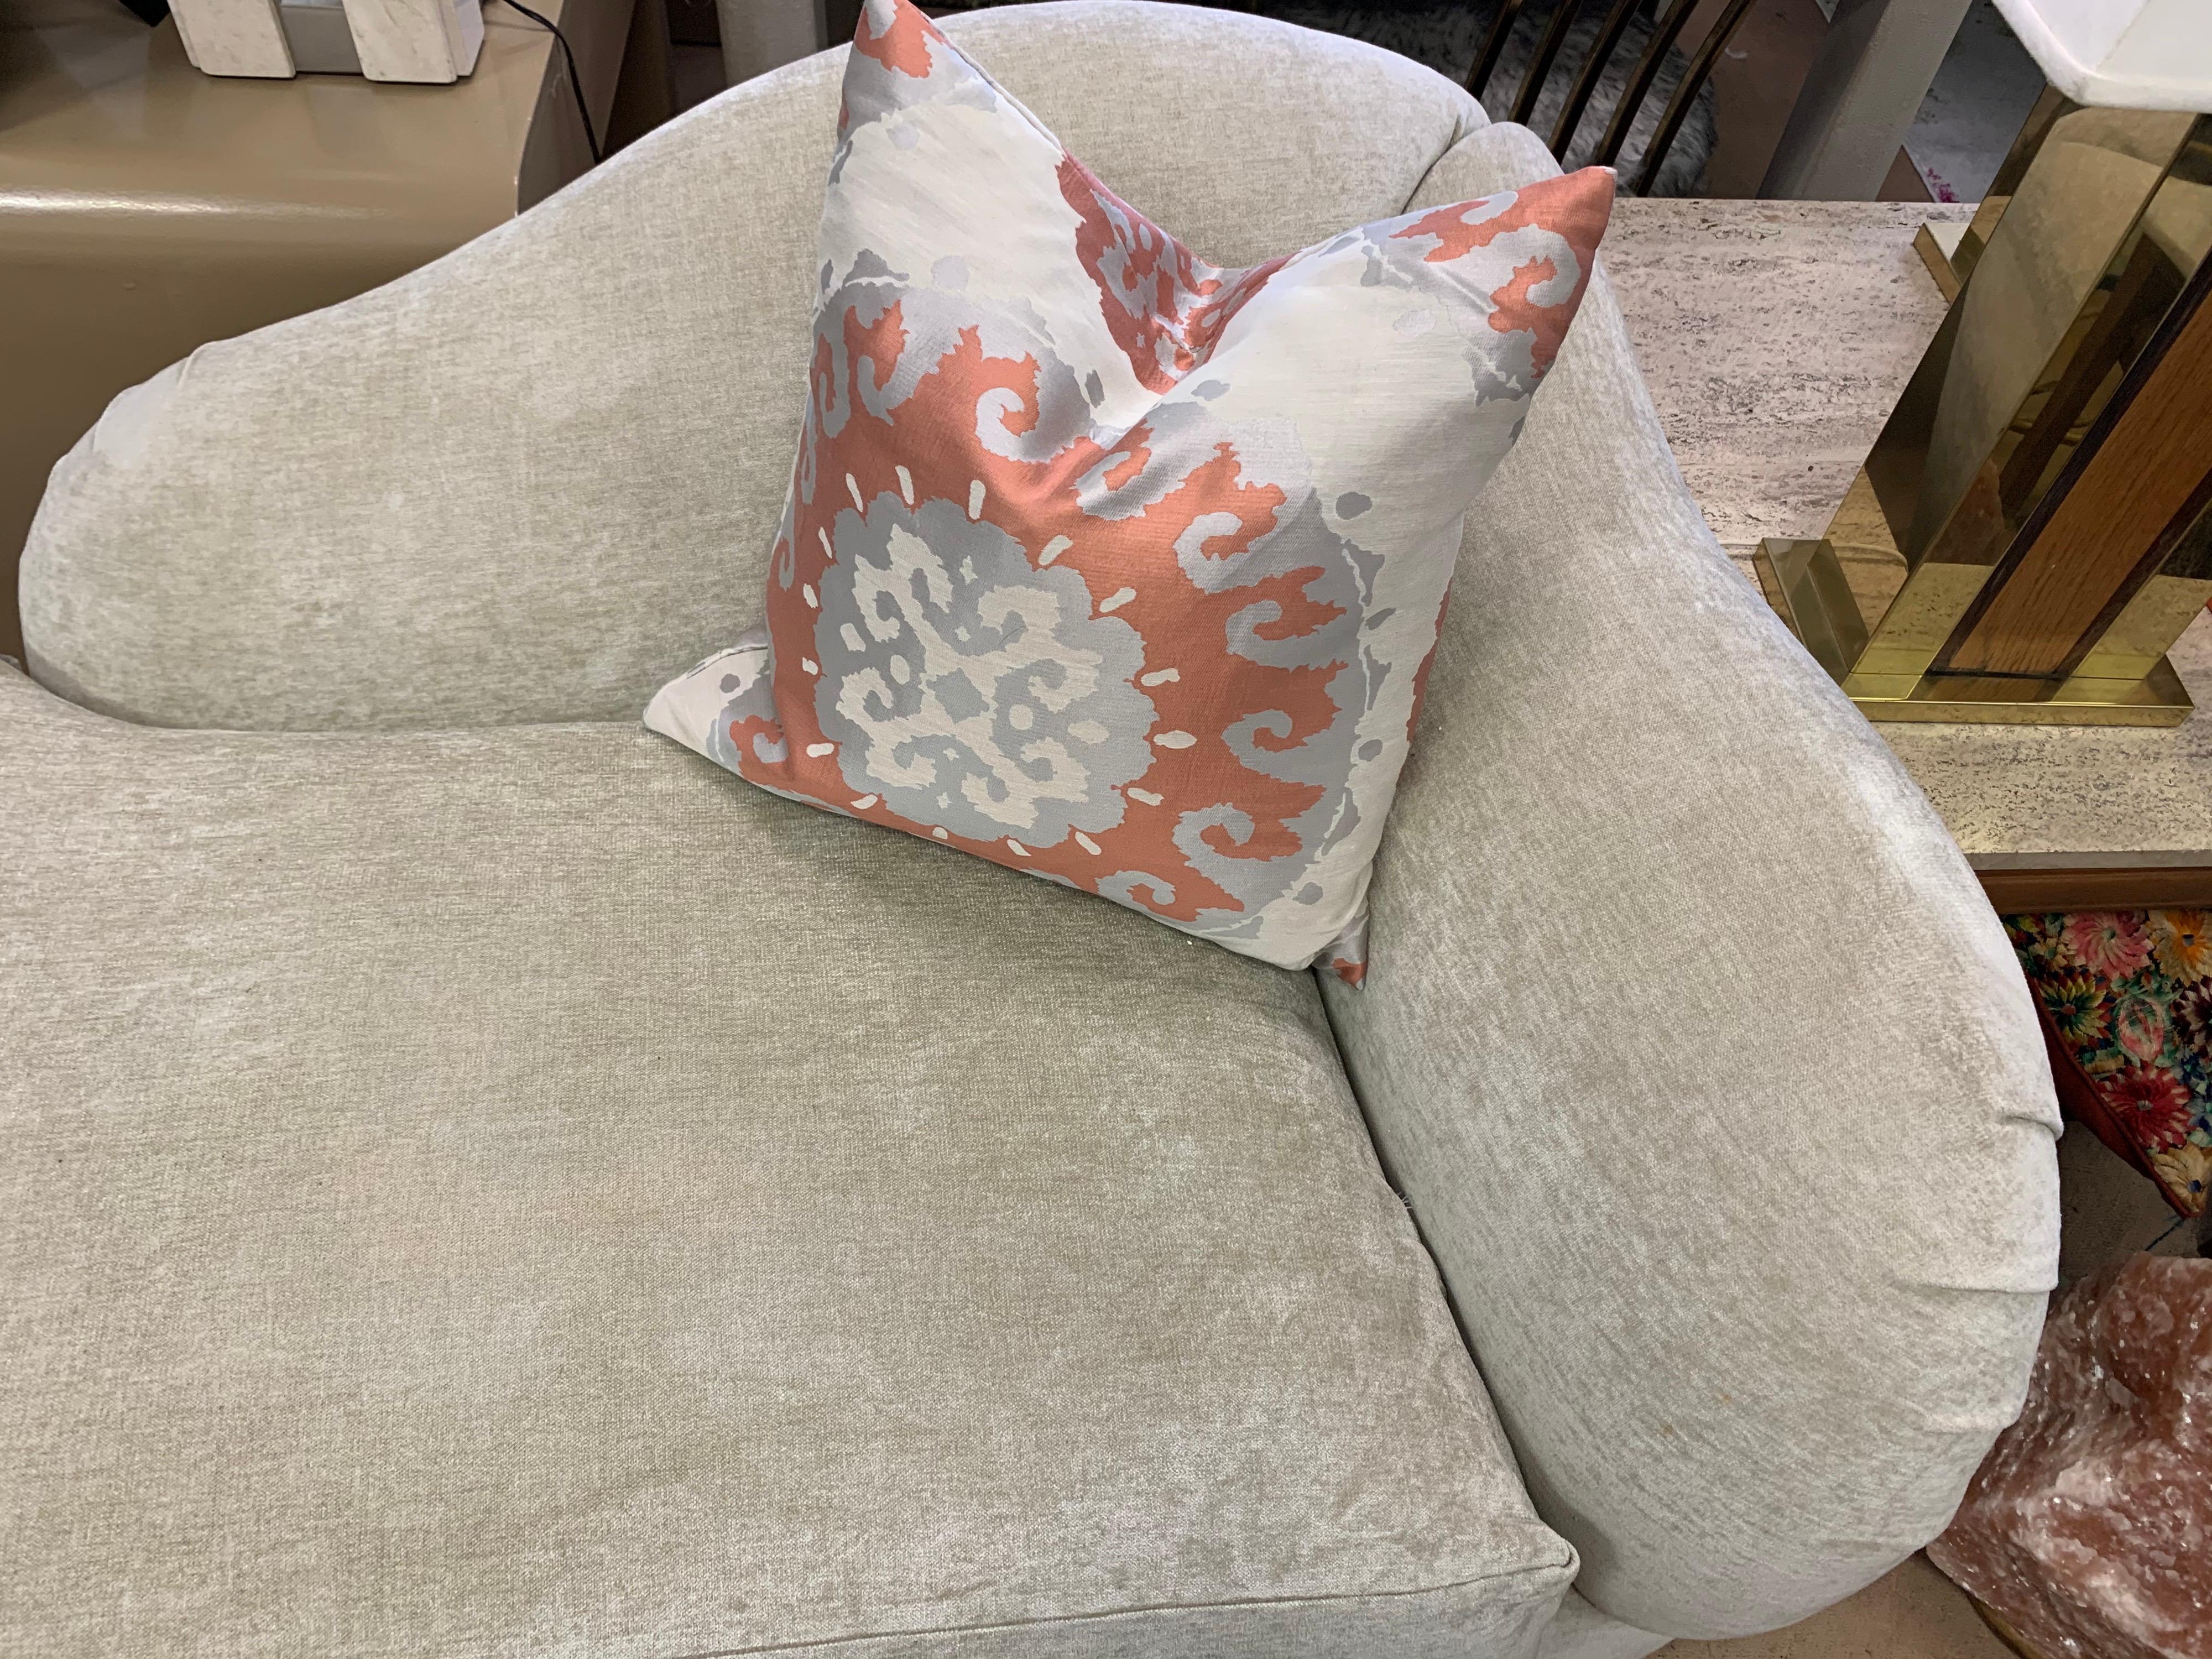 This is a very chic high end chase lounge made by the legendary Sally Sirkin Lewis for J Robert Scott. It is completely original. We recently had it steam cleaned and looks great as is or would be amazing in a new pattern colored fabric. The